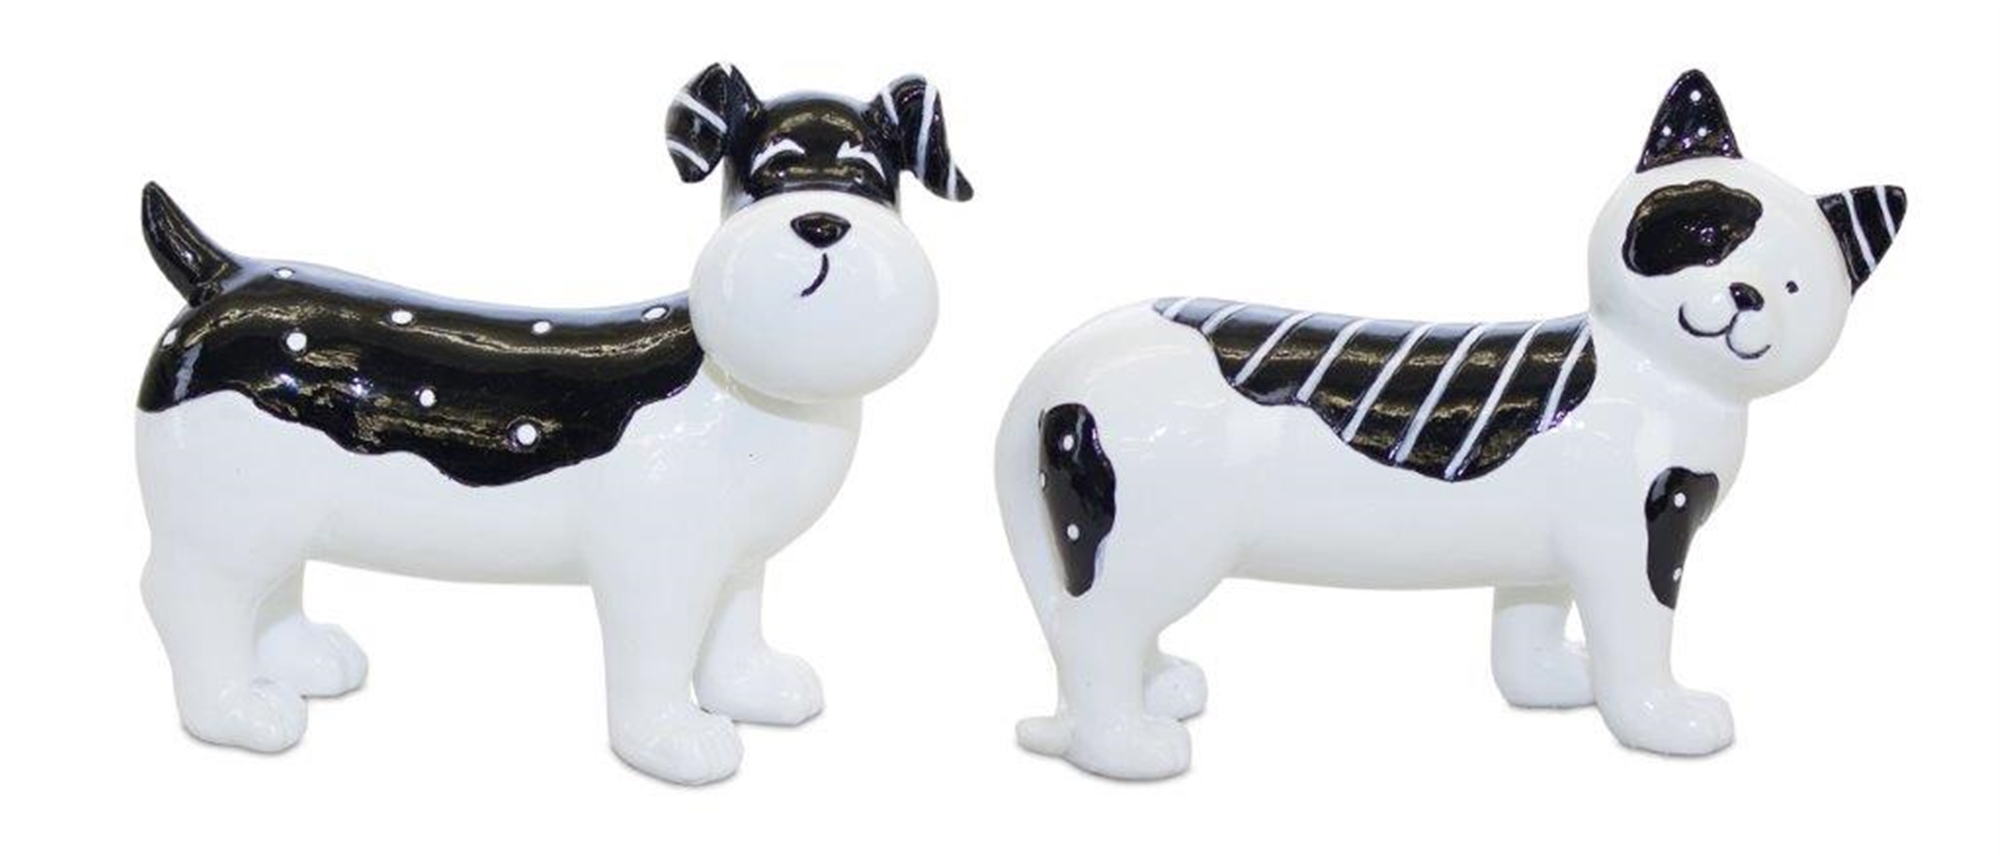 Dog and Cat (Set of 2) 7"L x 4.5"H, 6.25"L x 4.75"H Resin